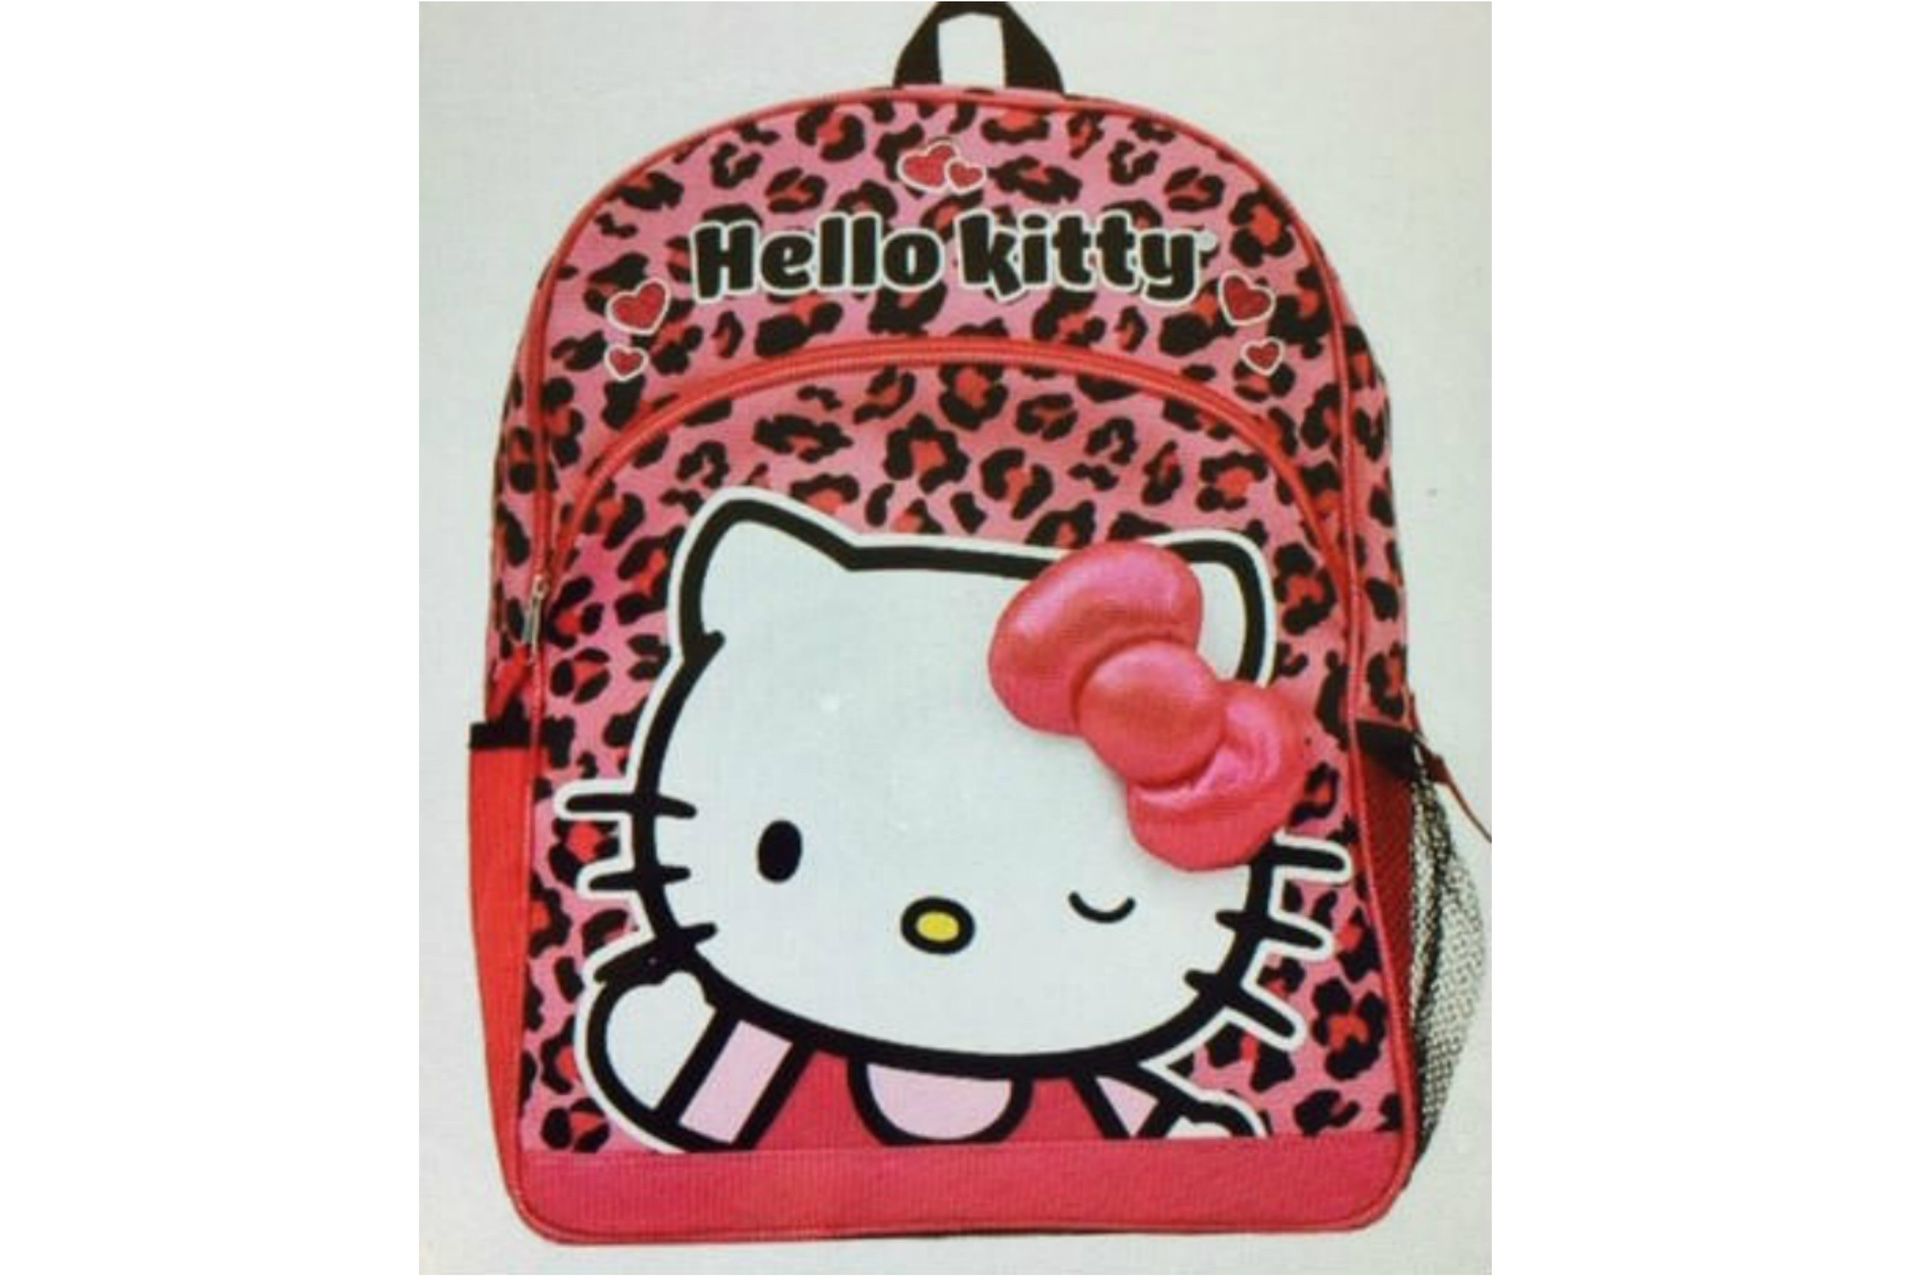 NWT Hello Kitty Bright Pink Leopard Backpack